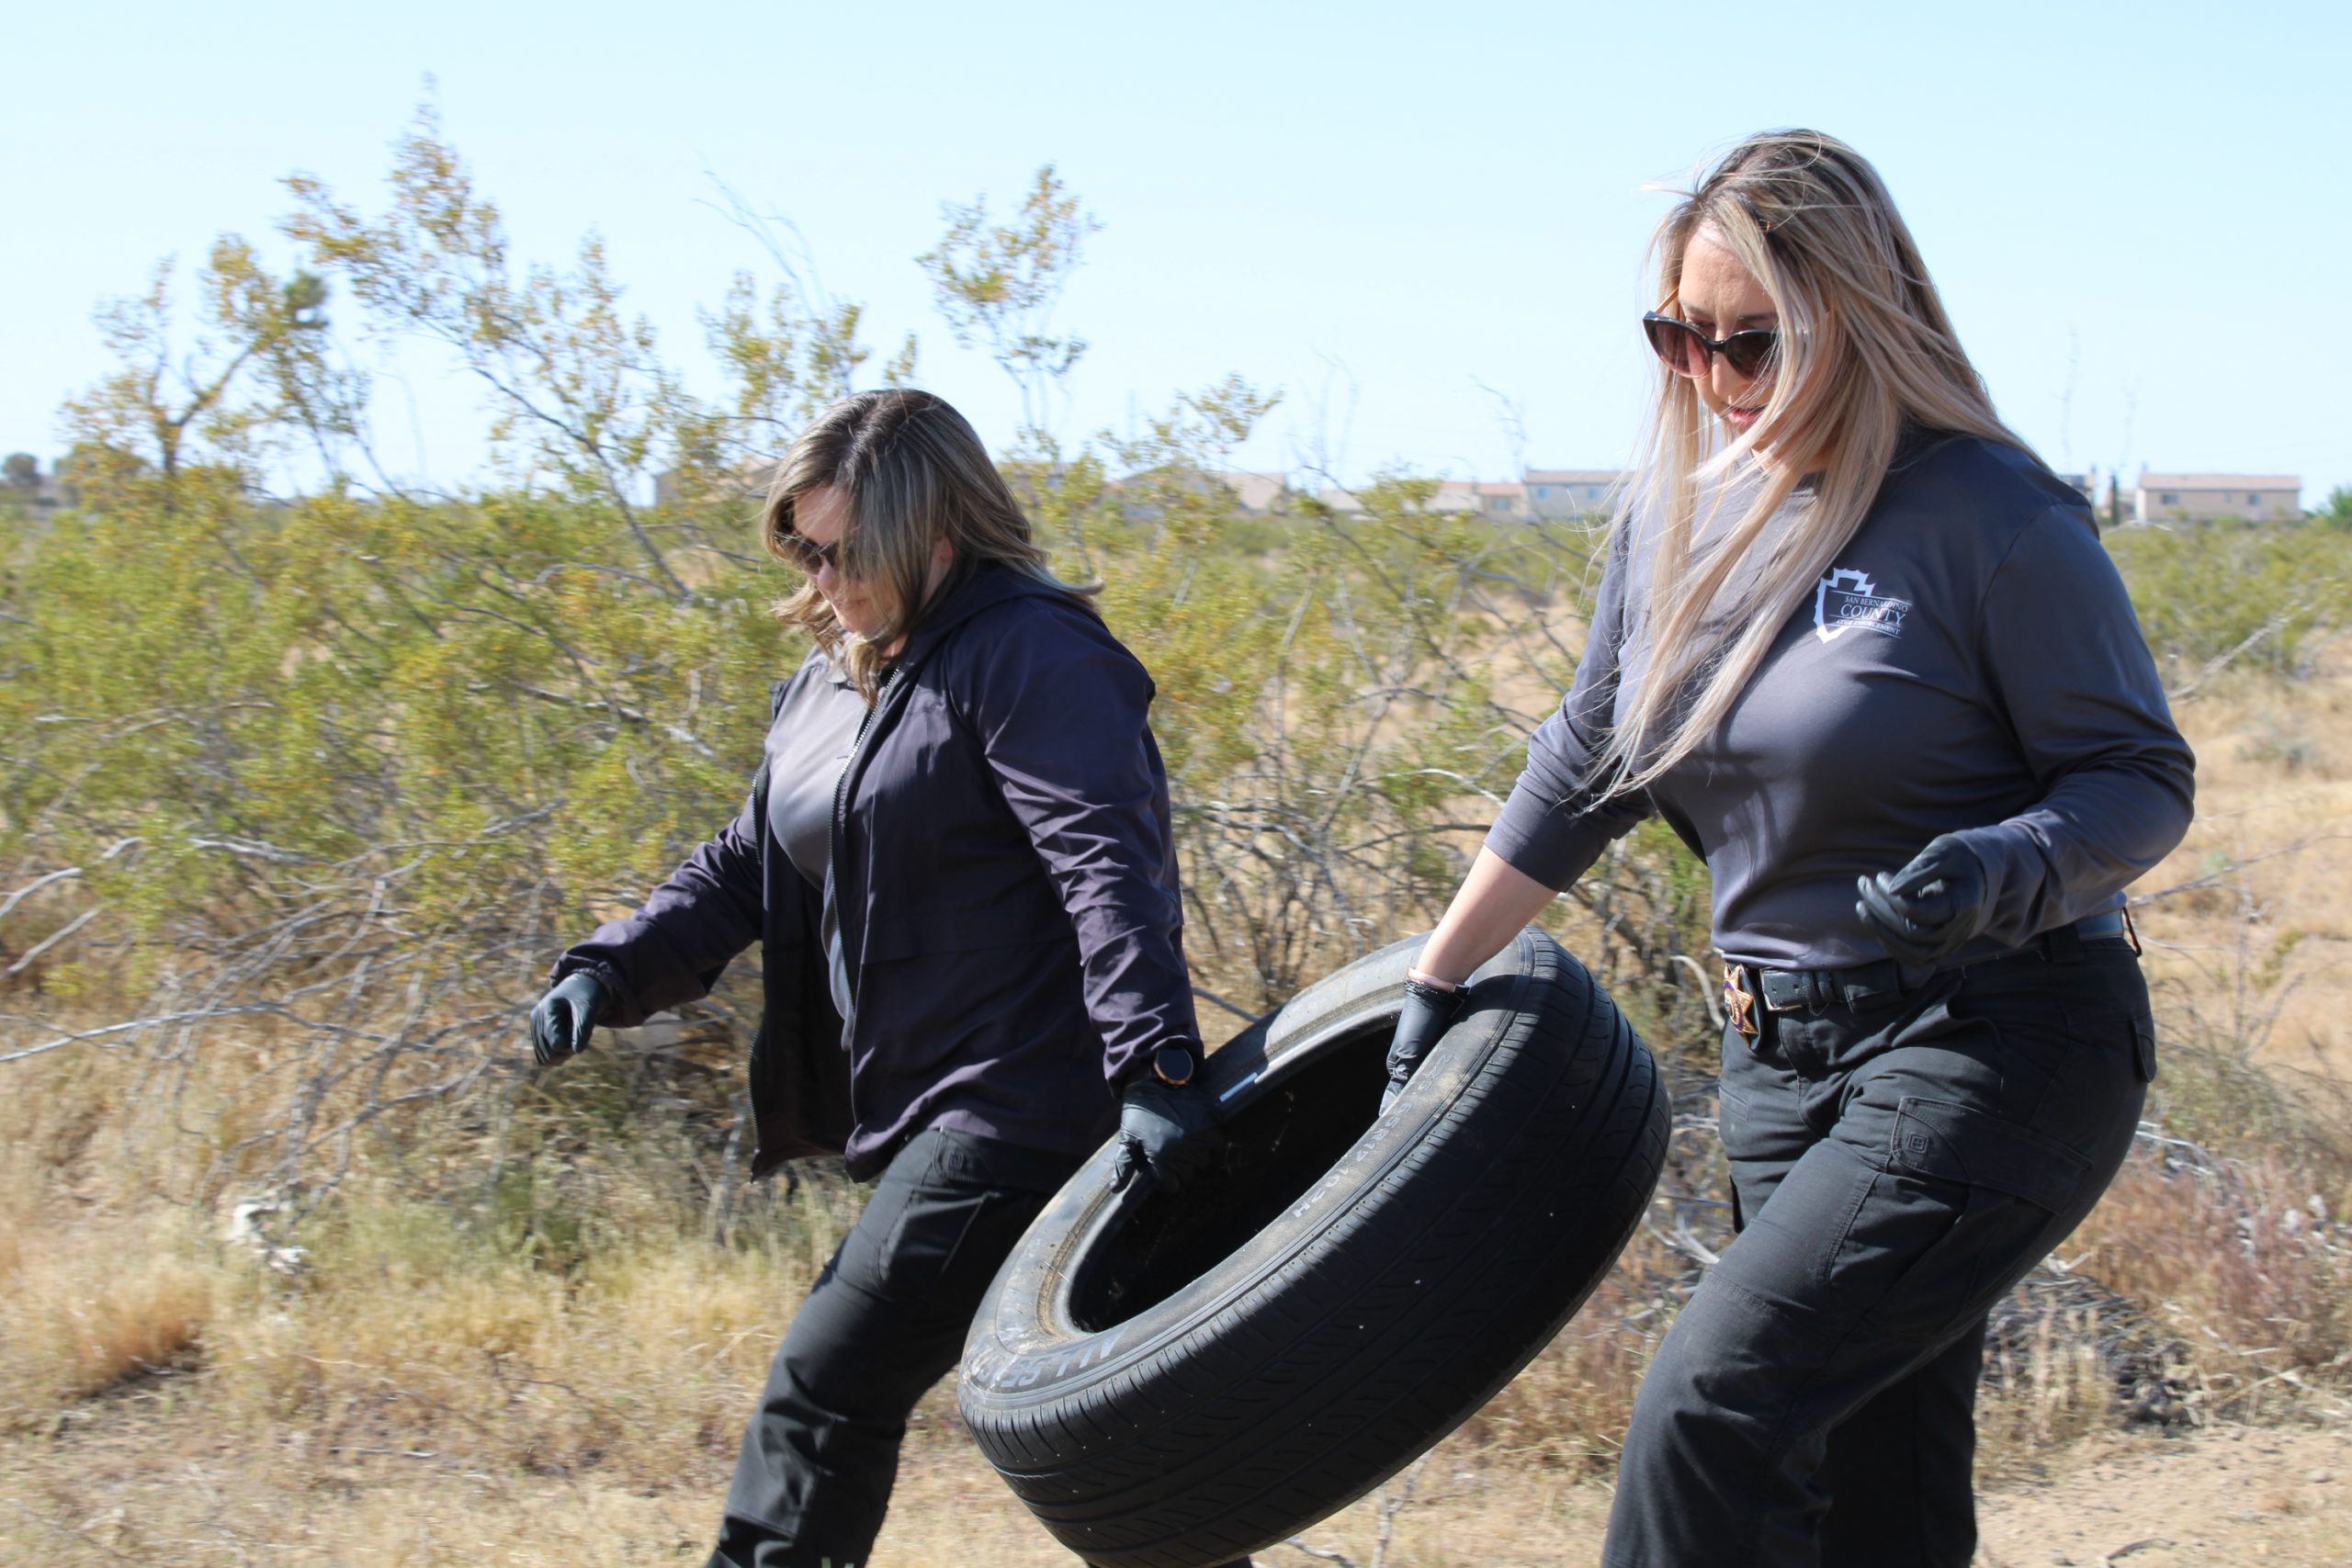 Two female code enforcement officers lift and carry a tire walking on a dirt road in the desert.